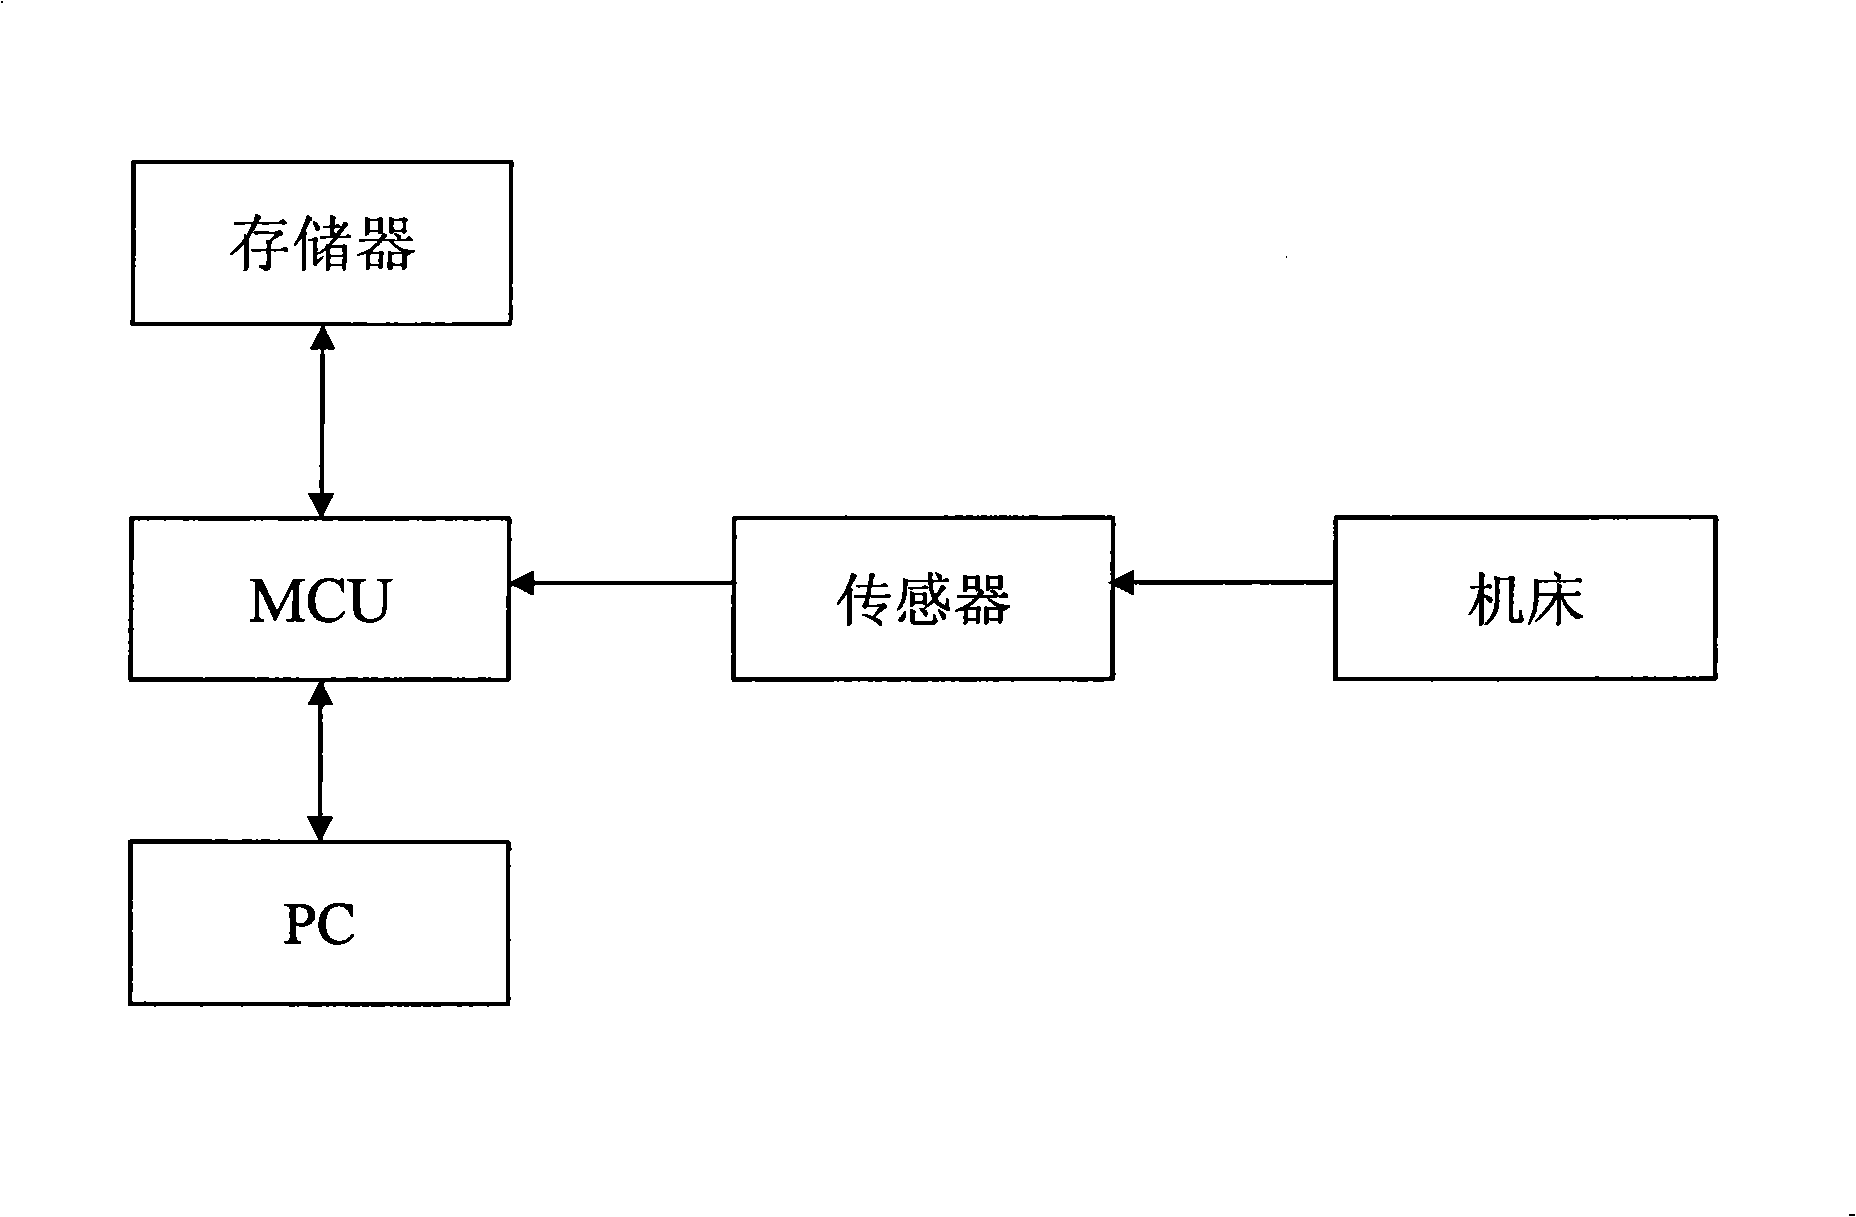 Data acquisition system of machine tool